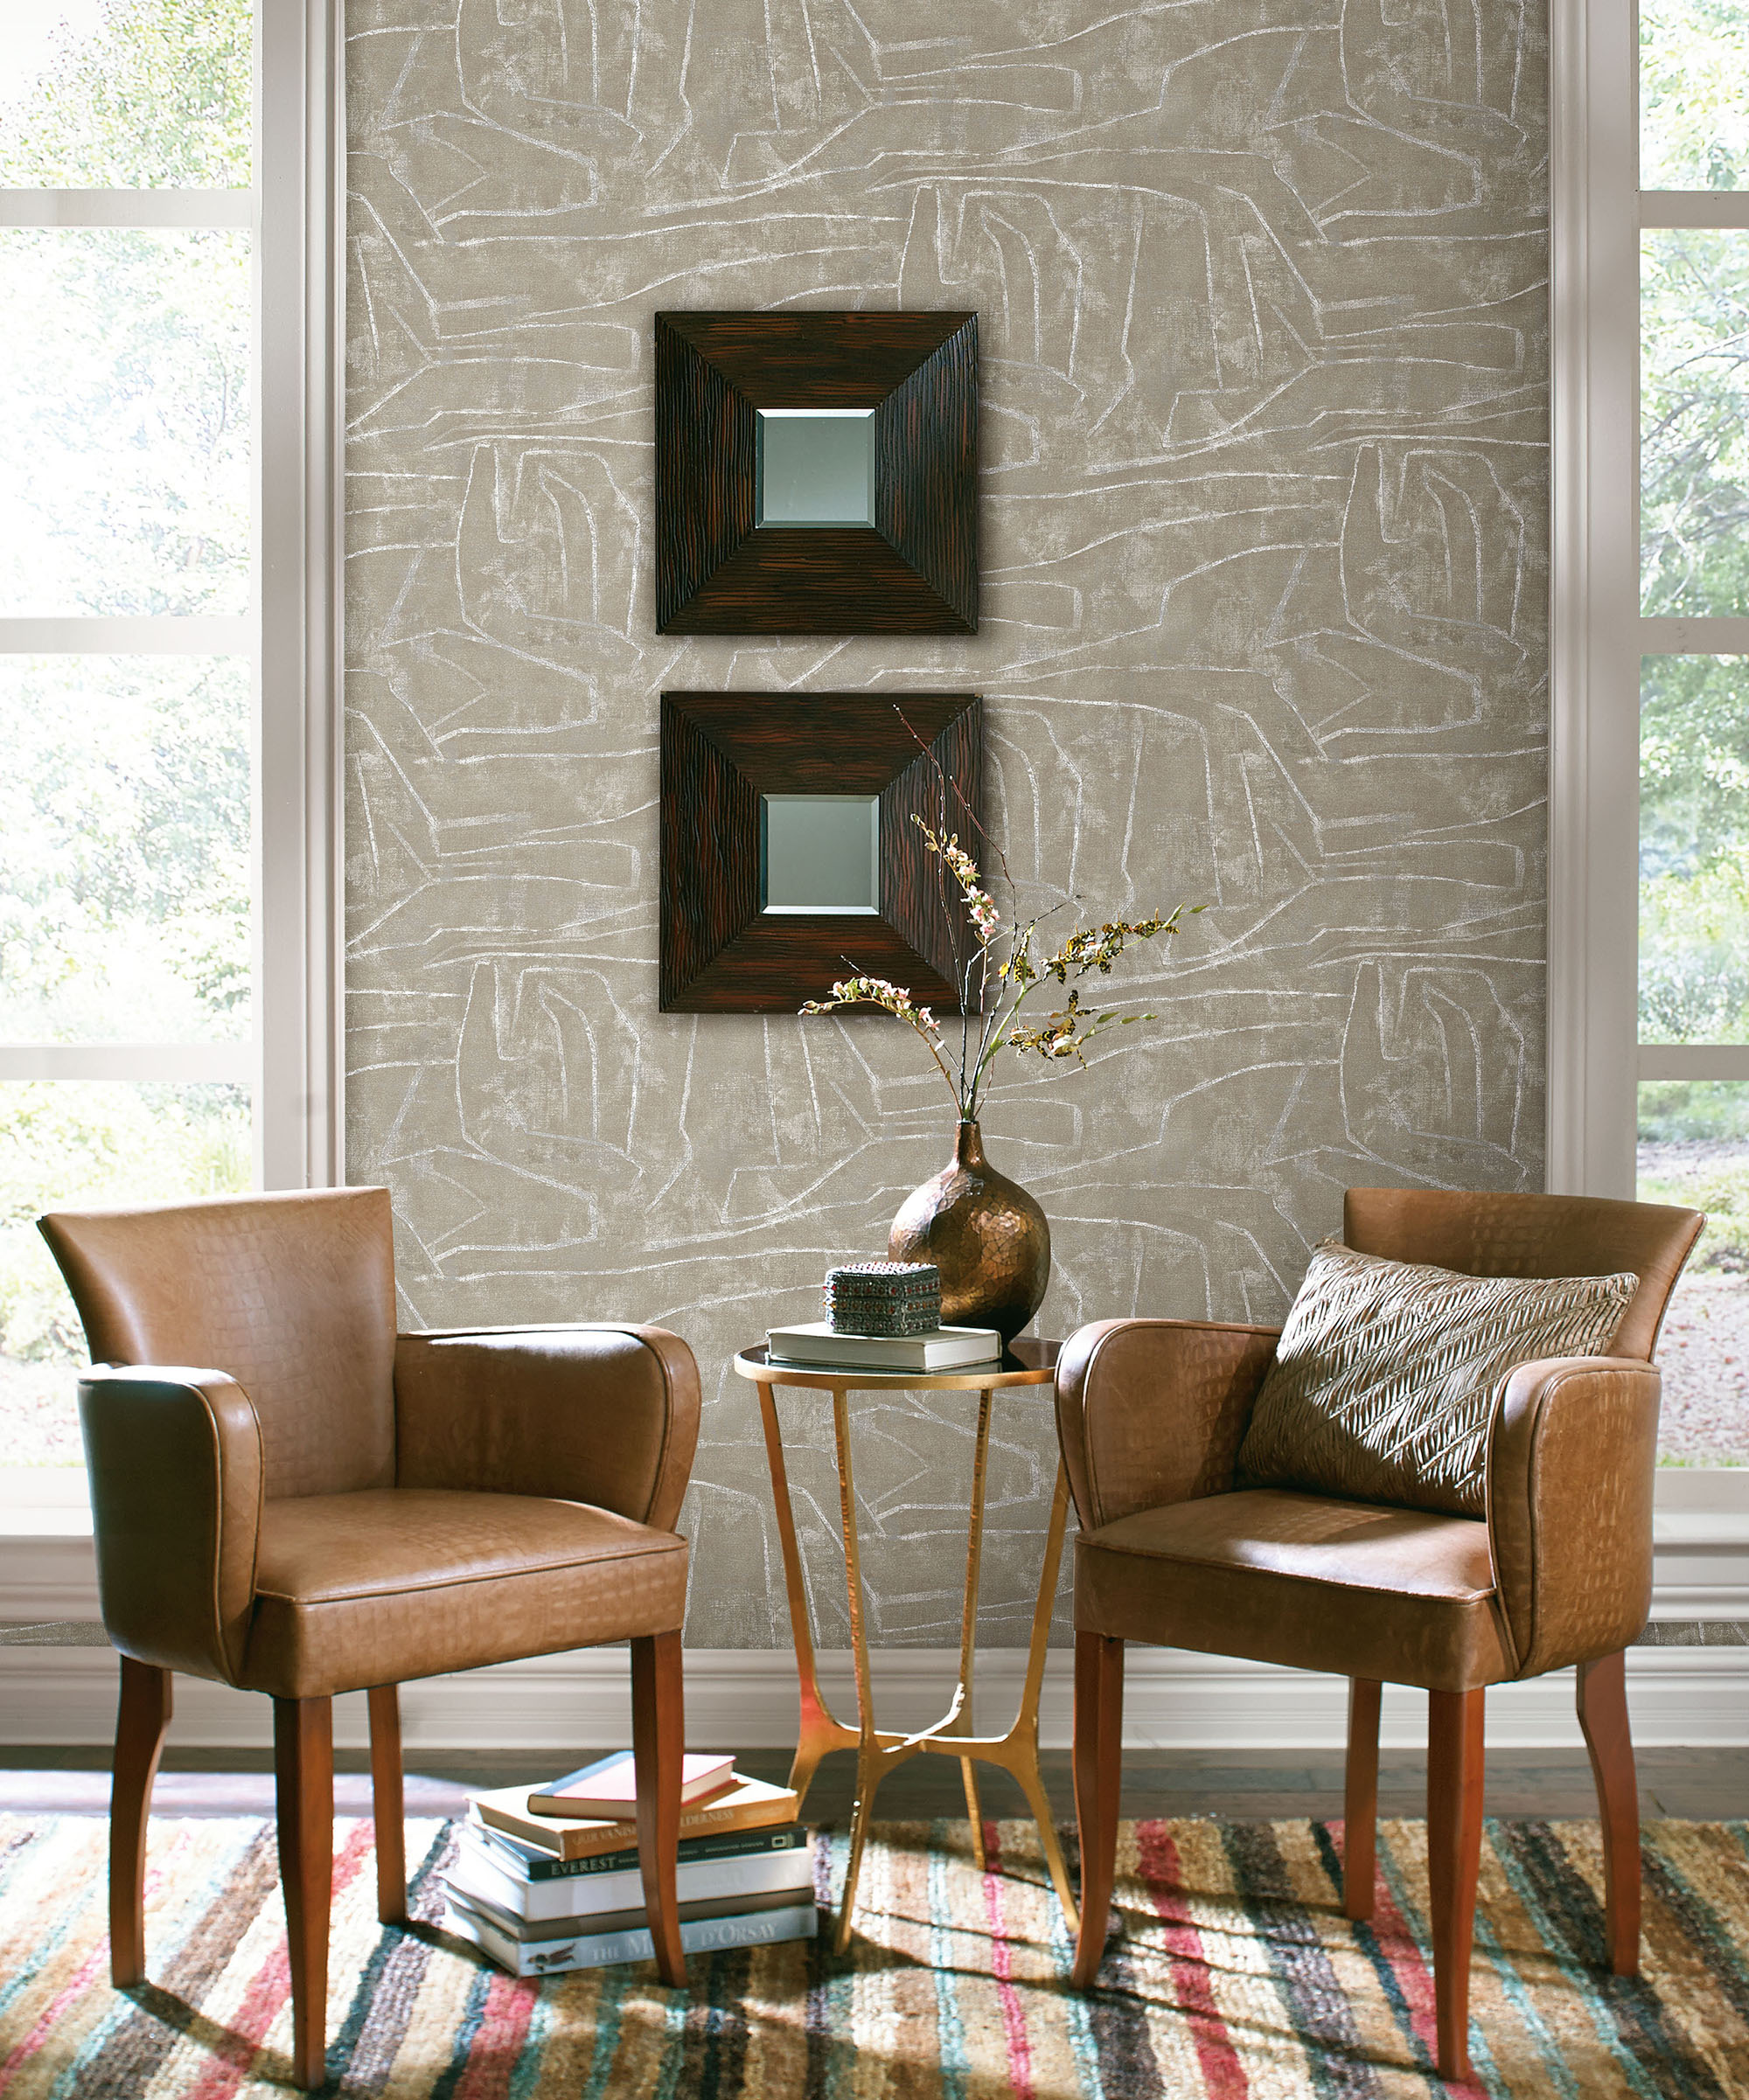 York Wallcoverings Partners with Rifle Paper Co on Wallpaper Designs